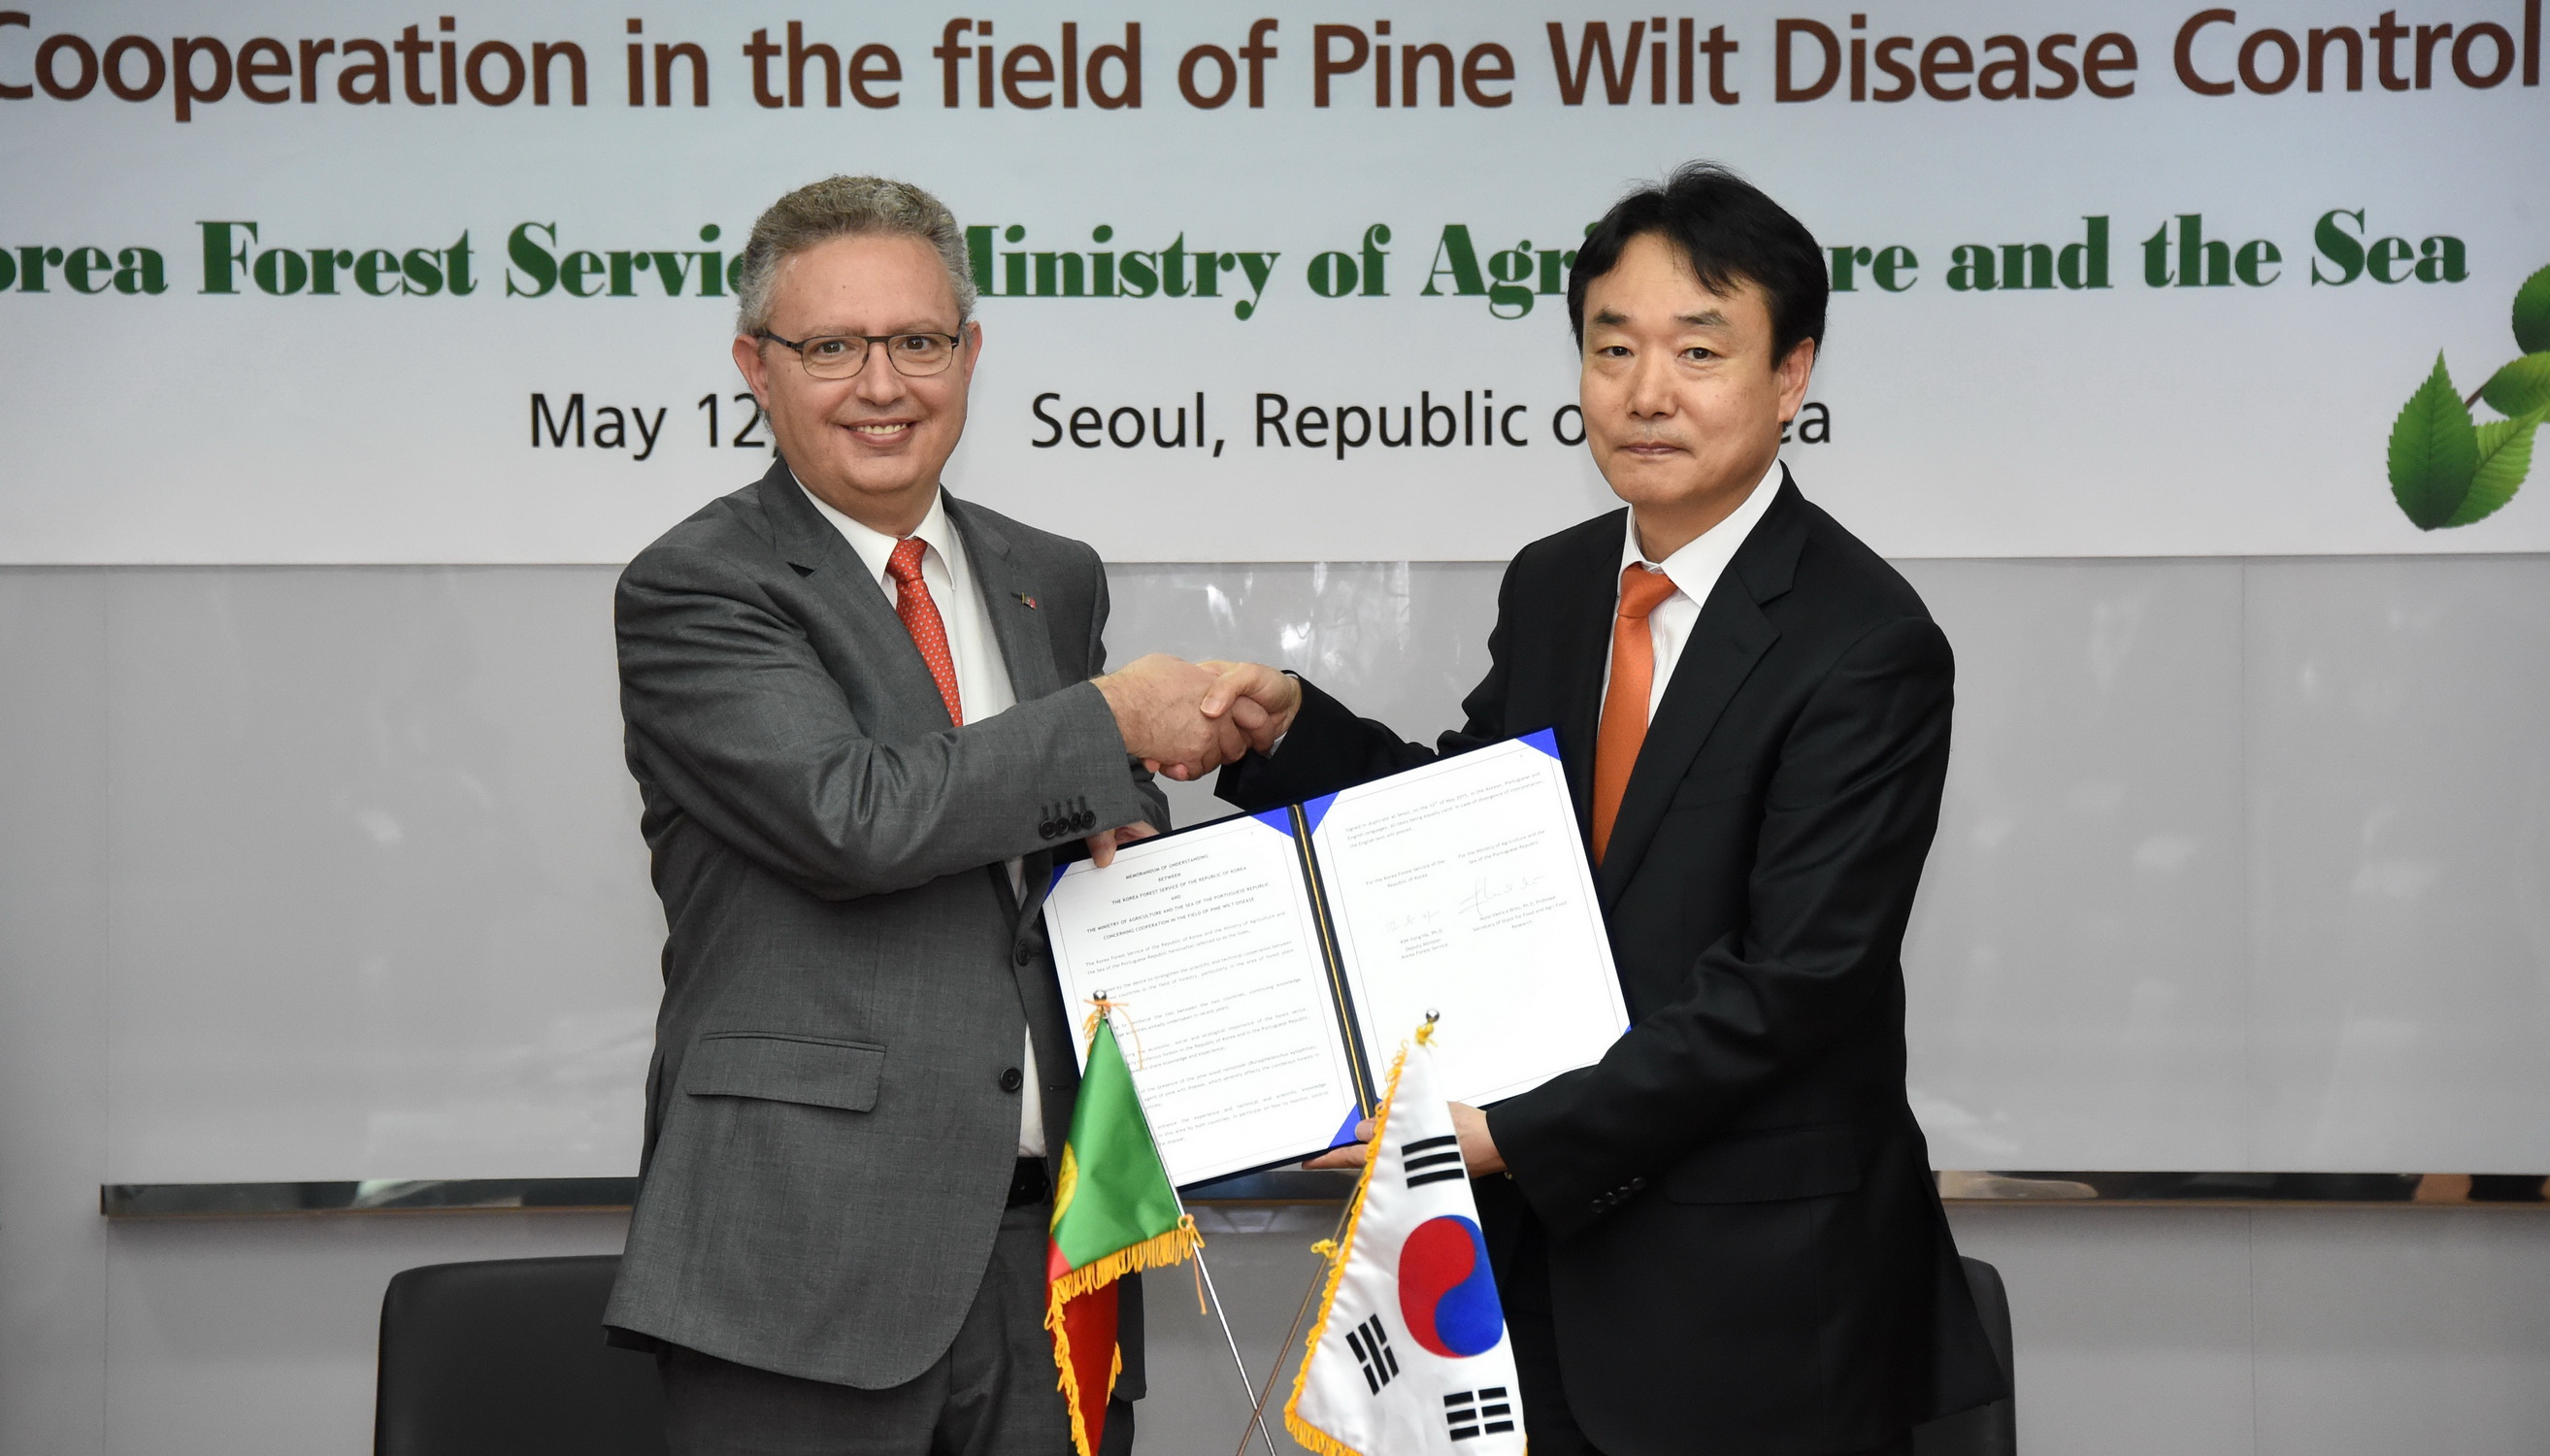 MOU with Portugal on Pine Wilt Disease Control 이미지1